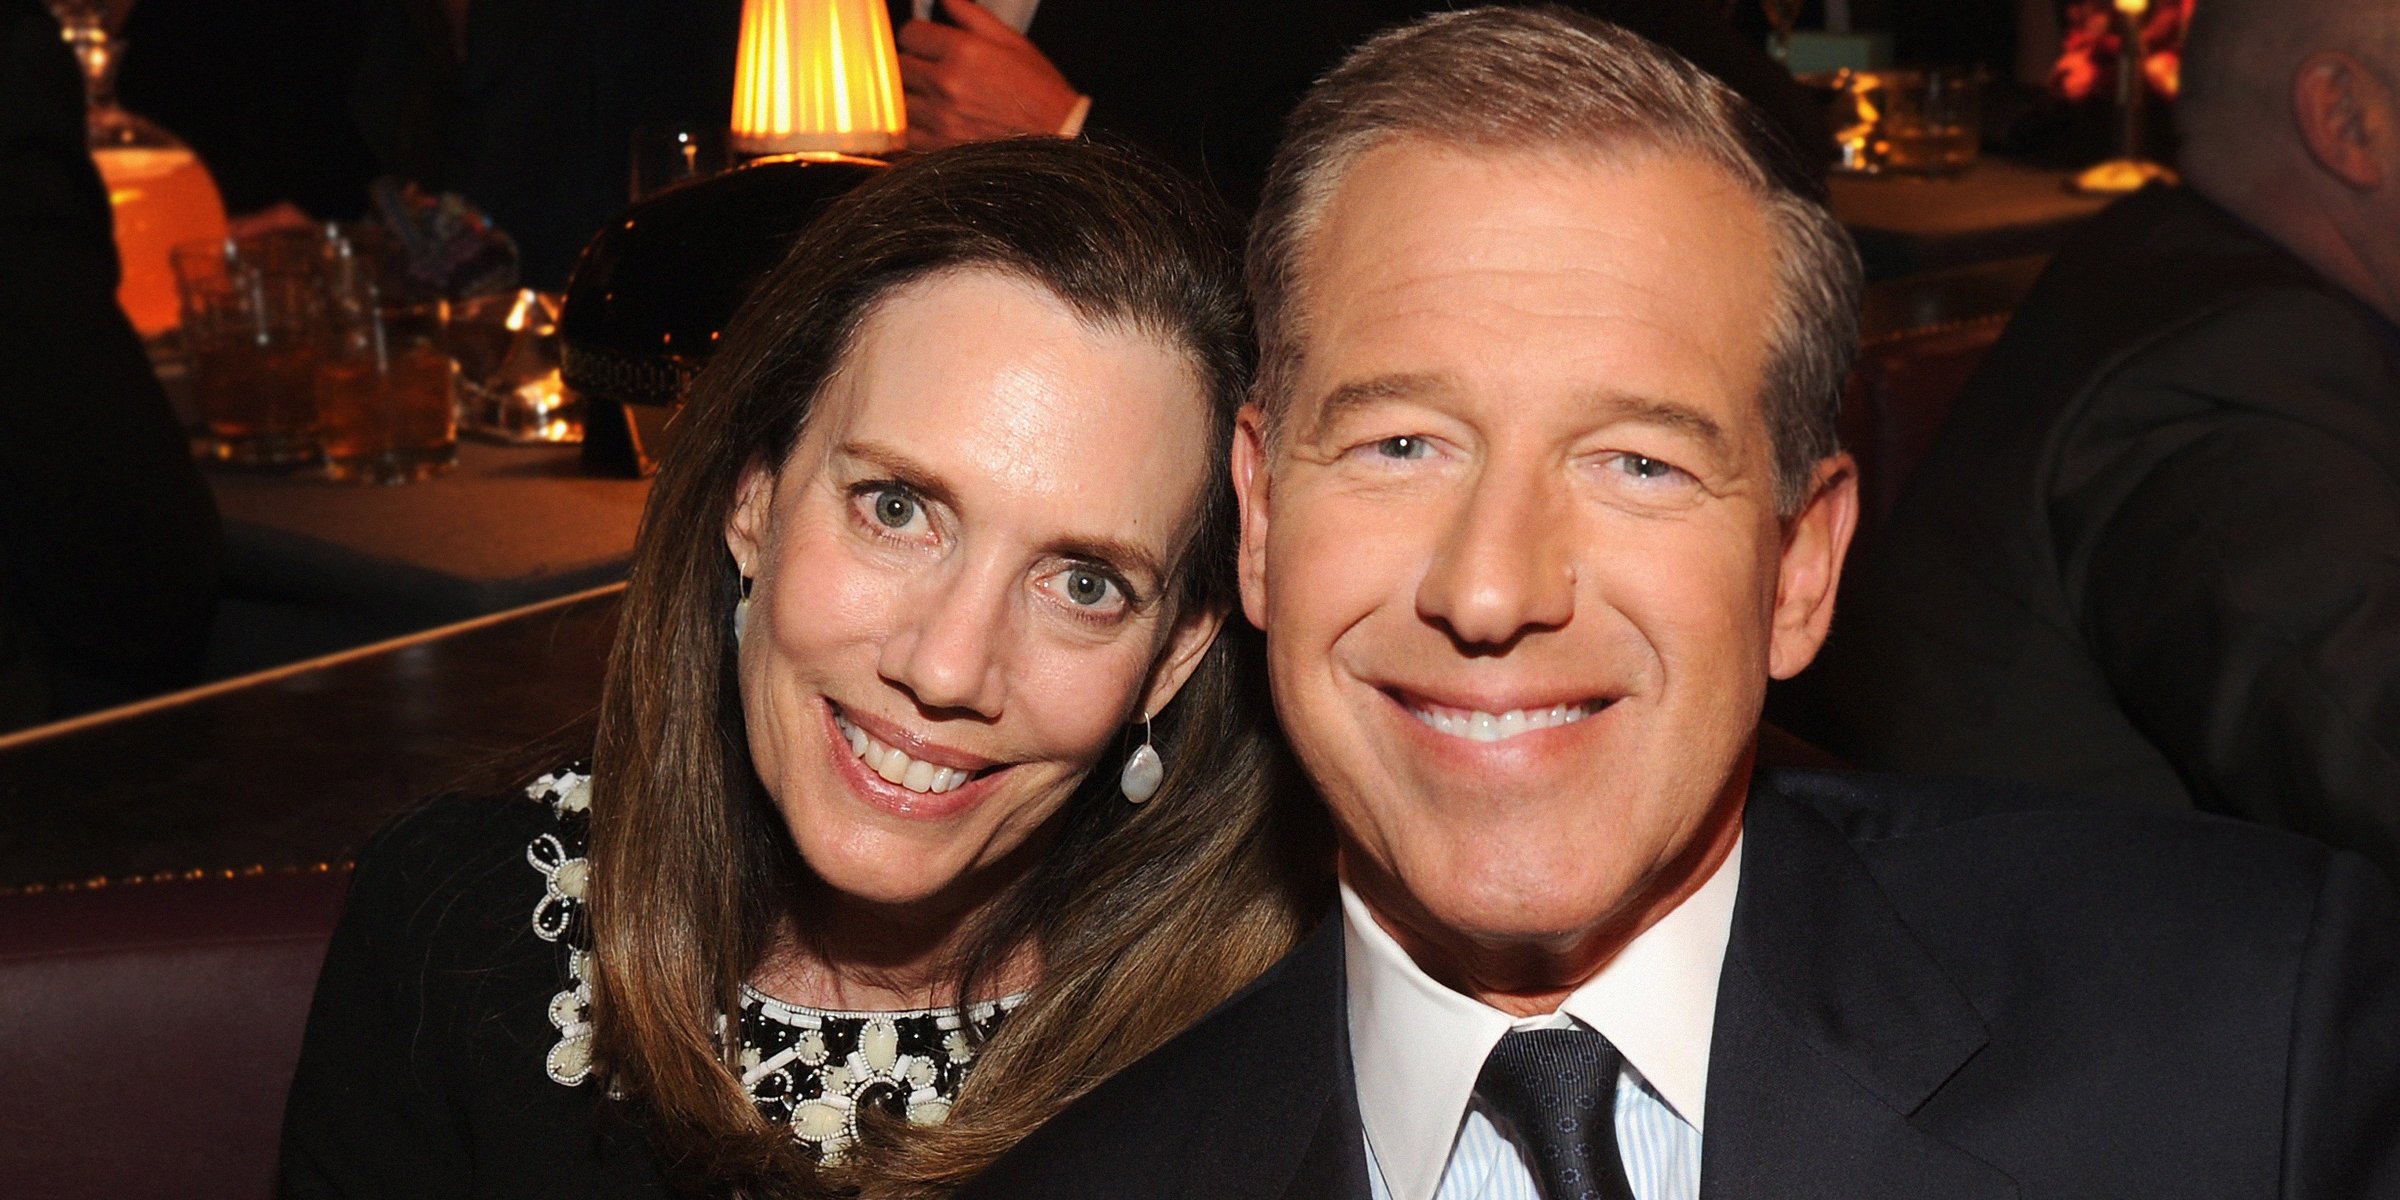 Jane Stoddard Williams and Brian Williams. | Source: Getty Images